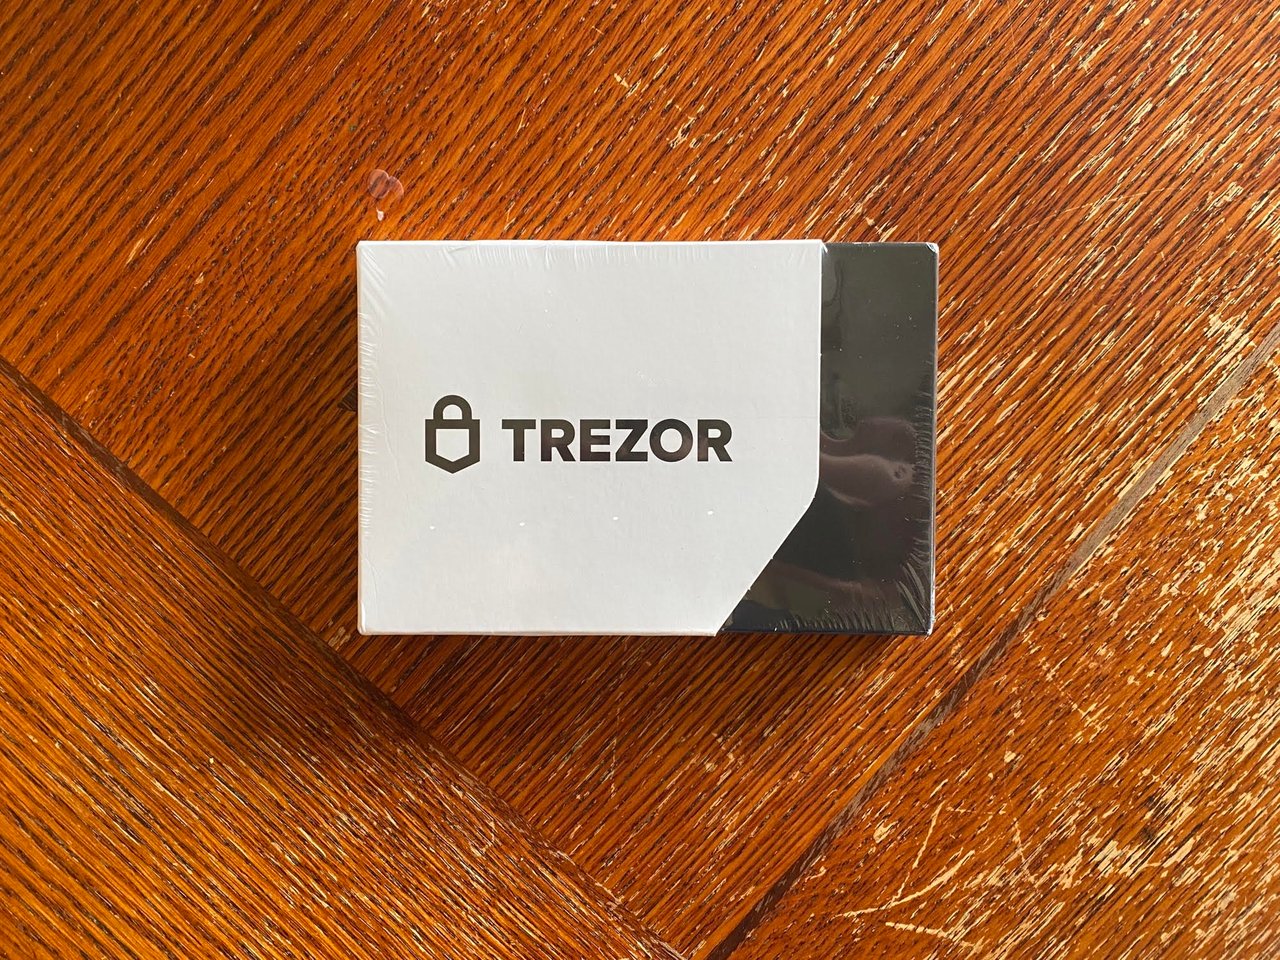 €22 Off Trezor Promo Code And Coupon Codes | Save With CouponGrind